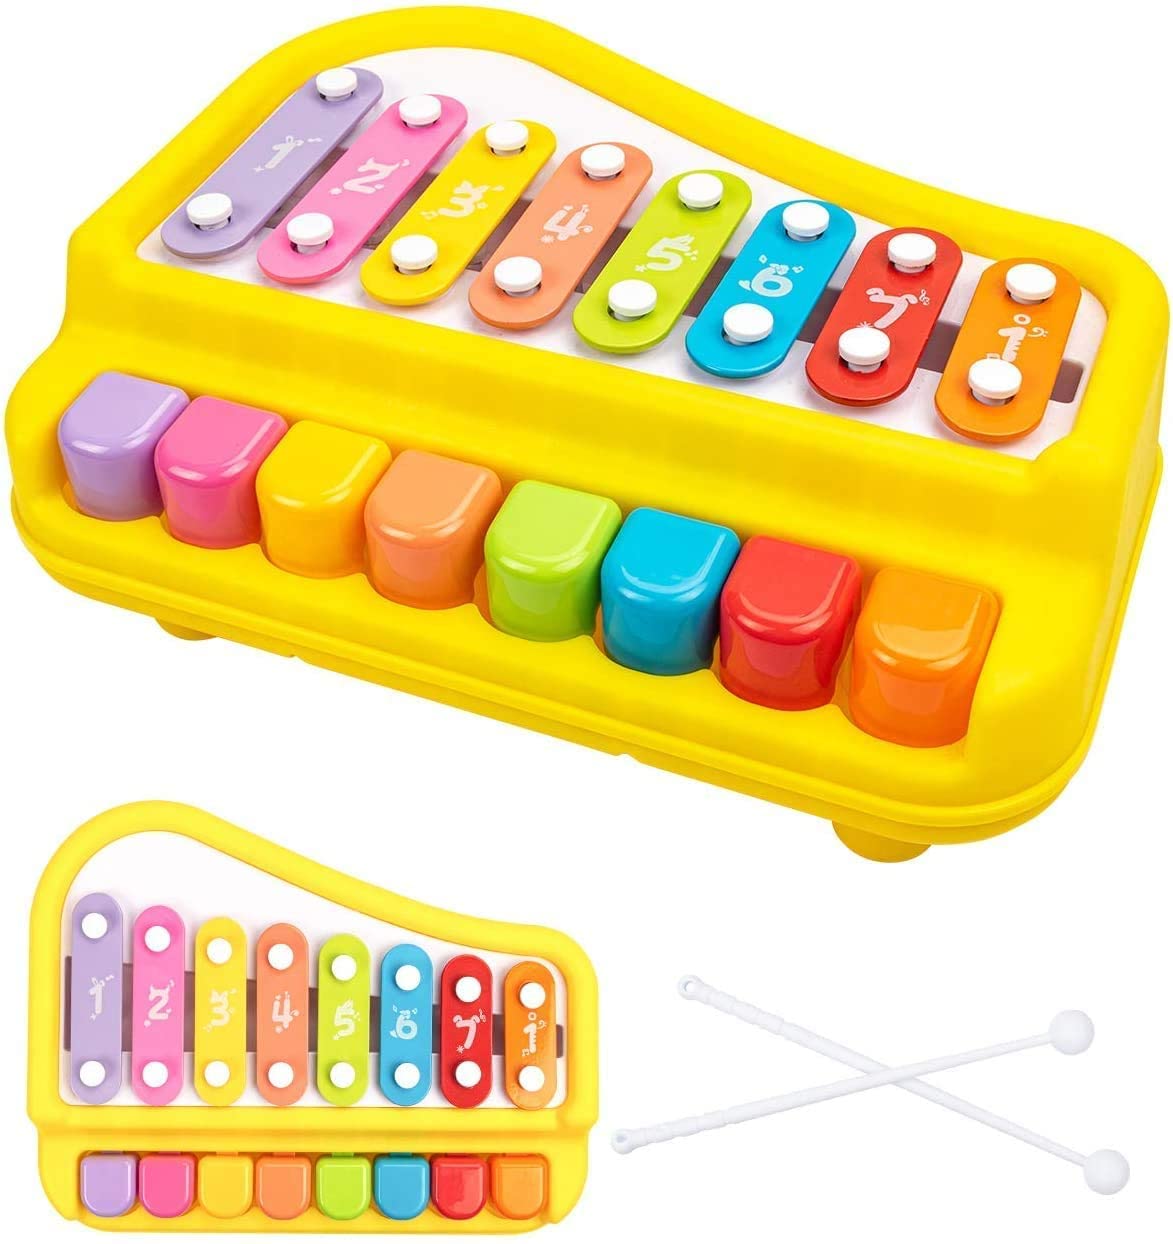 Piano Keyboard, Yamaha P45 2 in 1 Piano Xylophone For Kids, Educational Musical Instruments